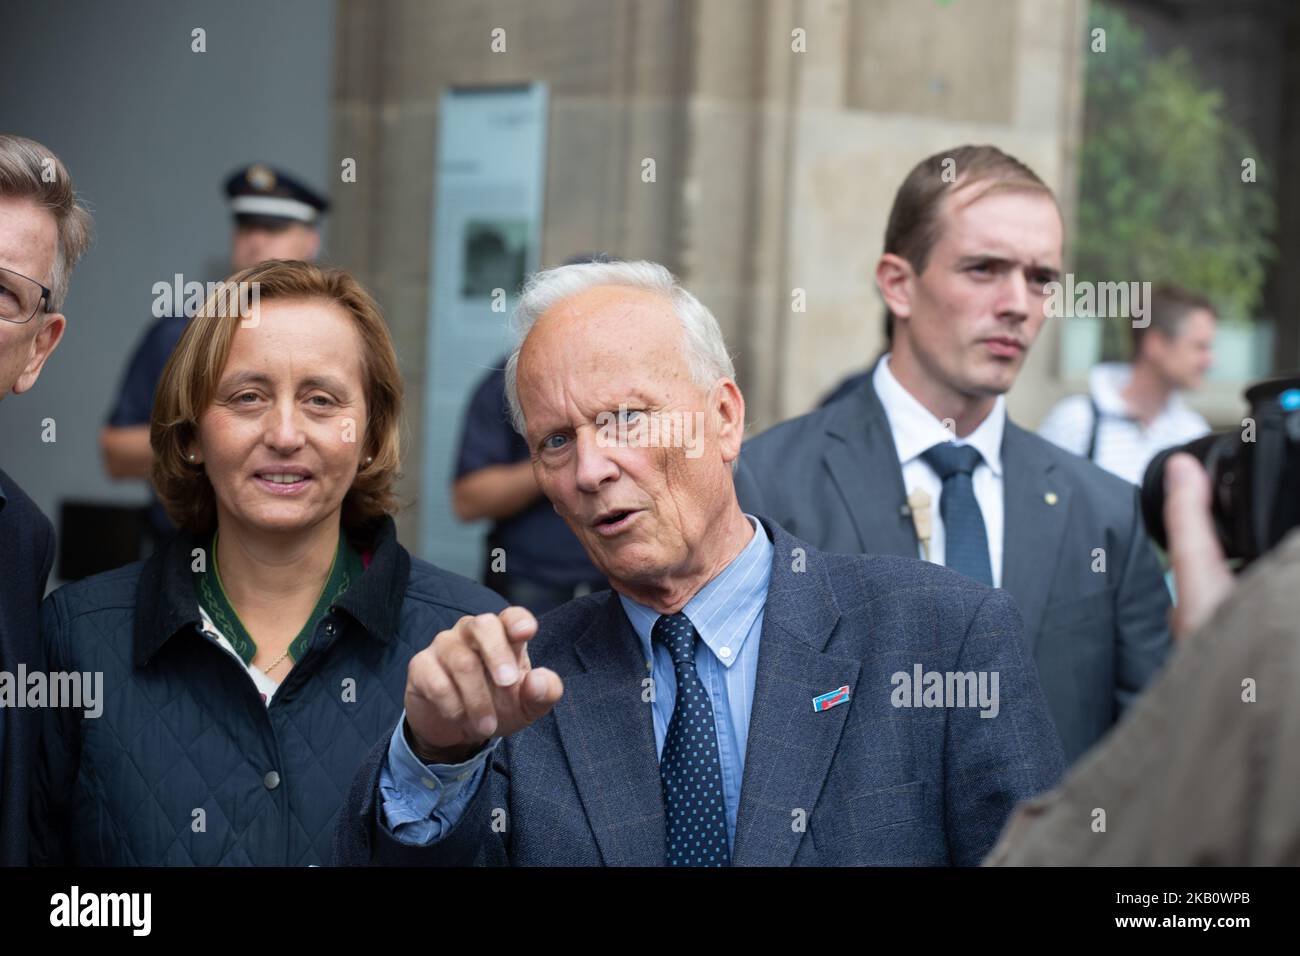 Beatrix von Storch standind next to Uli Henkel pointing the finger. The vice chairwoman of the Alternative for Germany (AfD) Beatrix von Storch held a short speech in Munich, Germany on September 8, 2018. Before that the candidates from Munich were presented. (Photo by Alexander Pohl/NurPhoto) Stock Photo